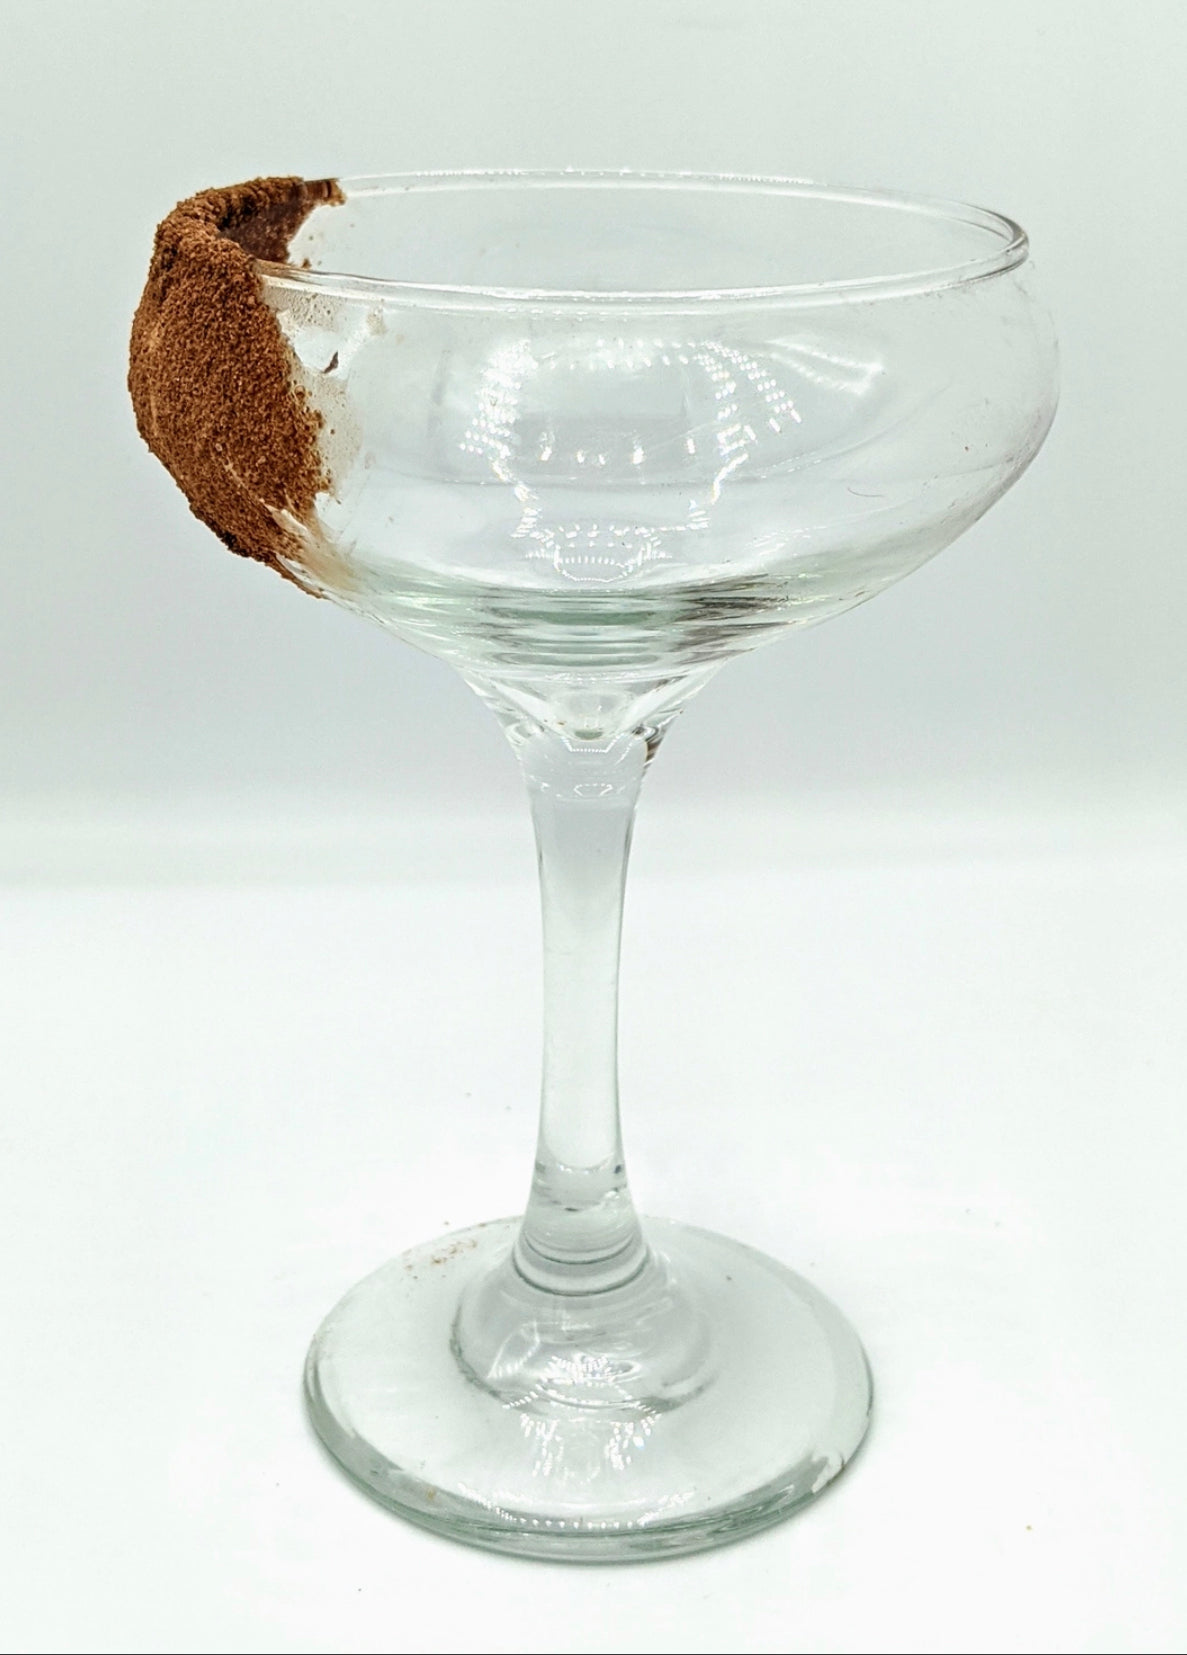 example of spiced cocoa rimmer on a martini glass 